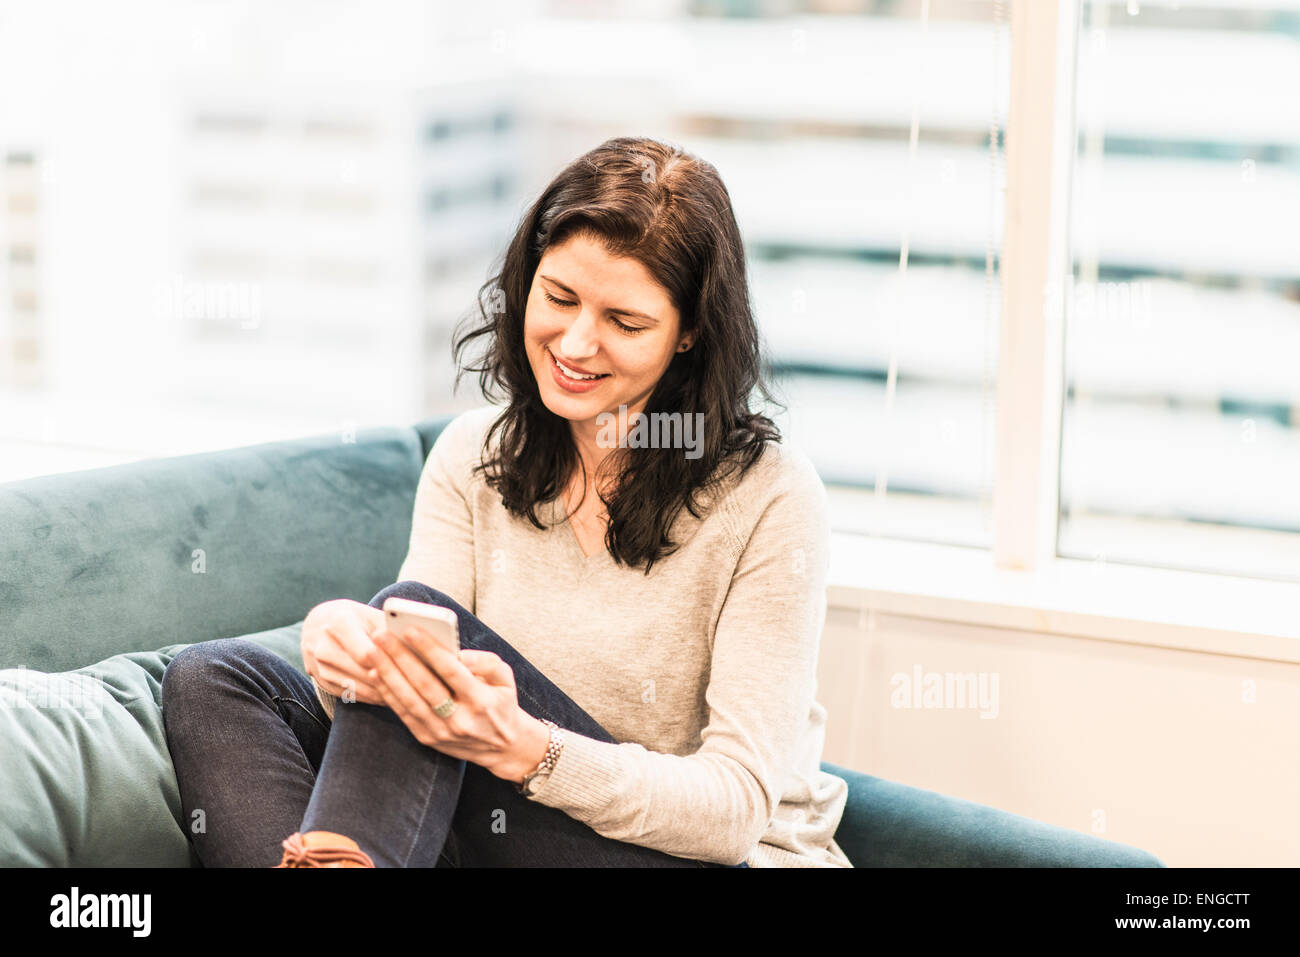 A woman seated with her feet up on a sofa, looking at her smart phone. Stock Photo